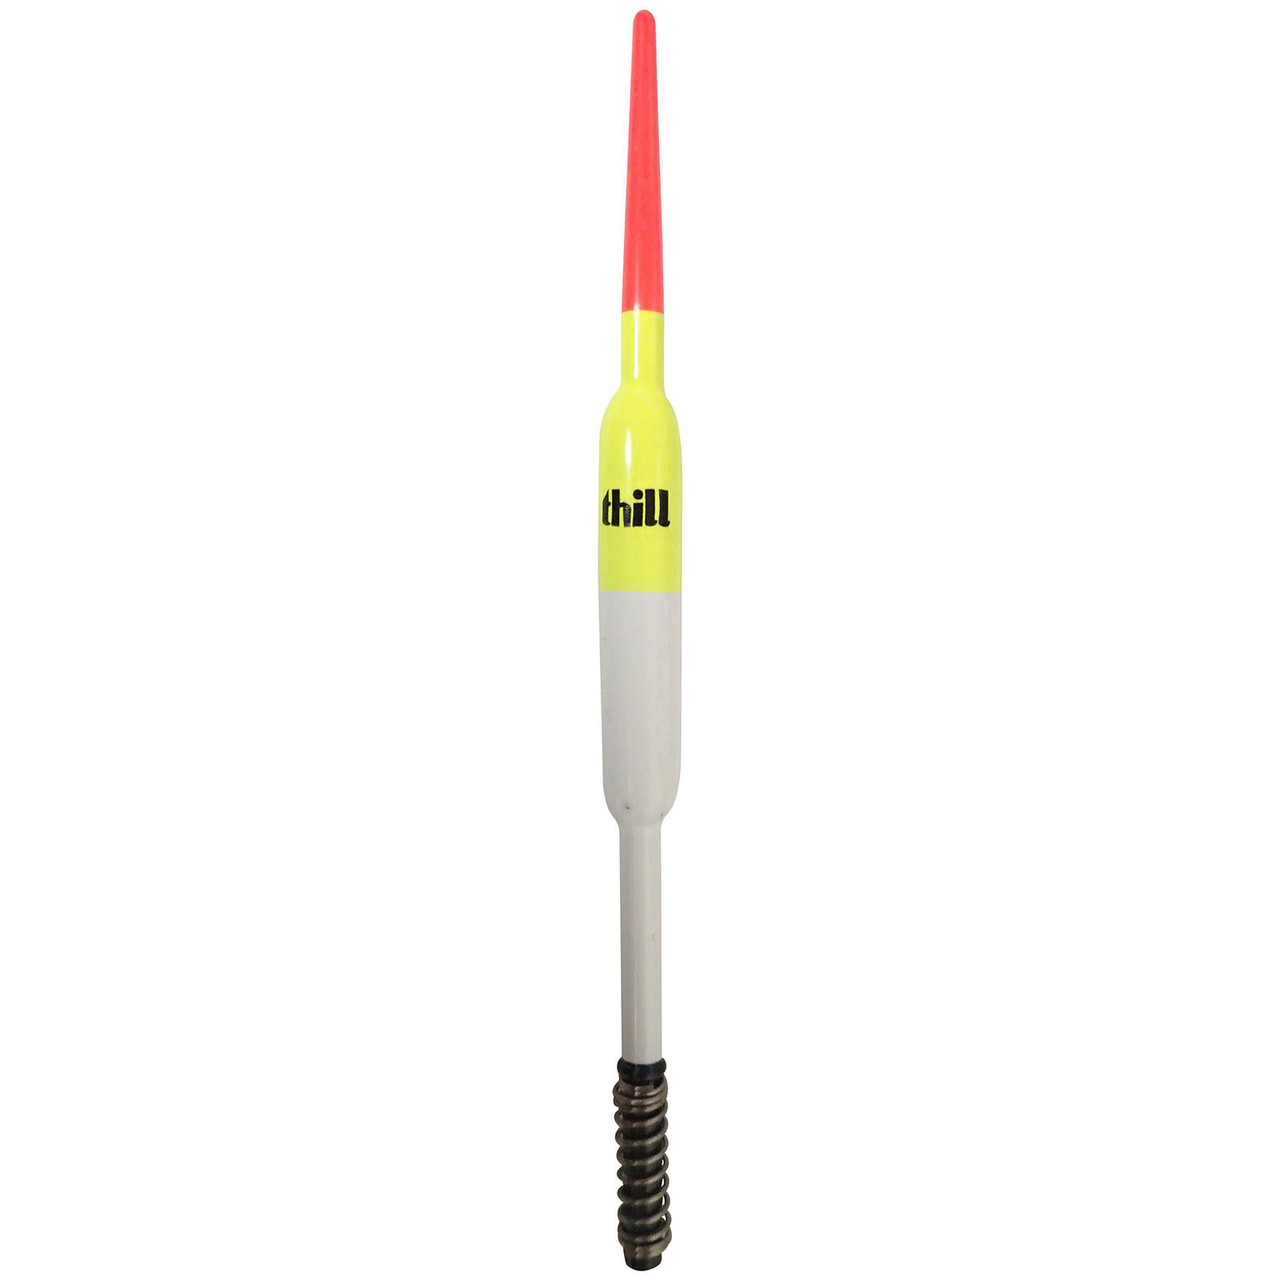 Thill America's Favorite Float - 3/8 Pencil Spring